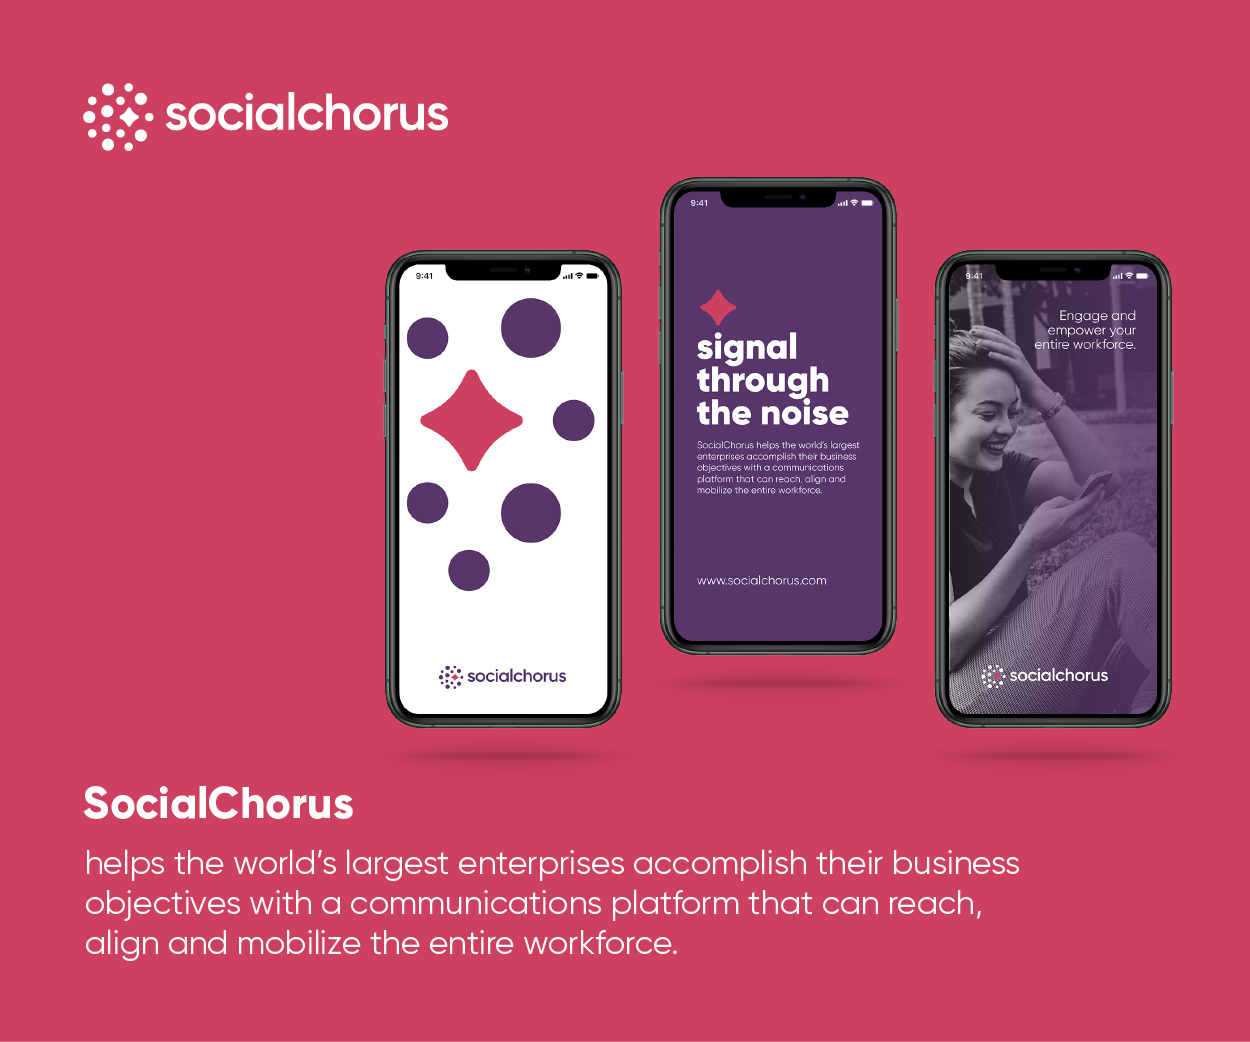 SocialChorus – workforce communications platform that enables reaching, aligning, and mobilizing every worker Cover Design Image